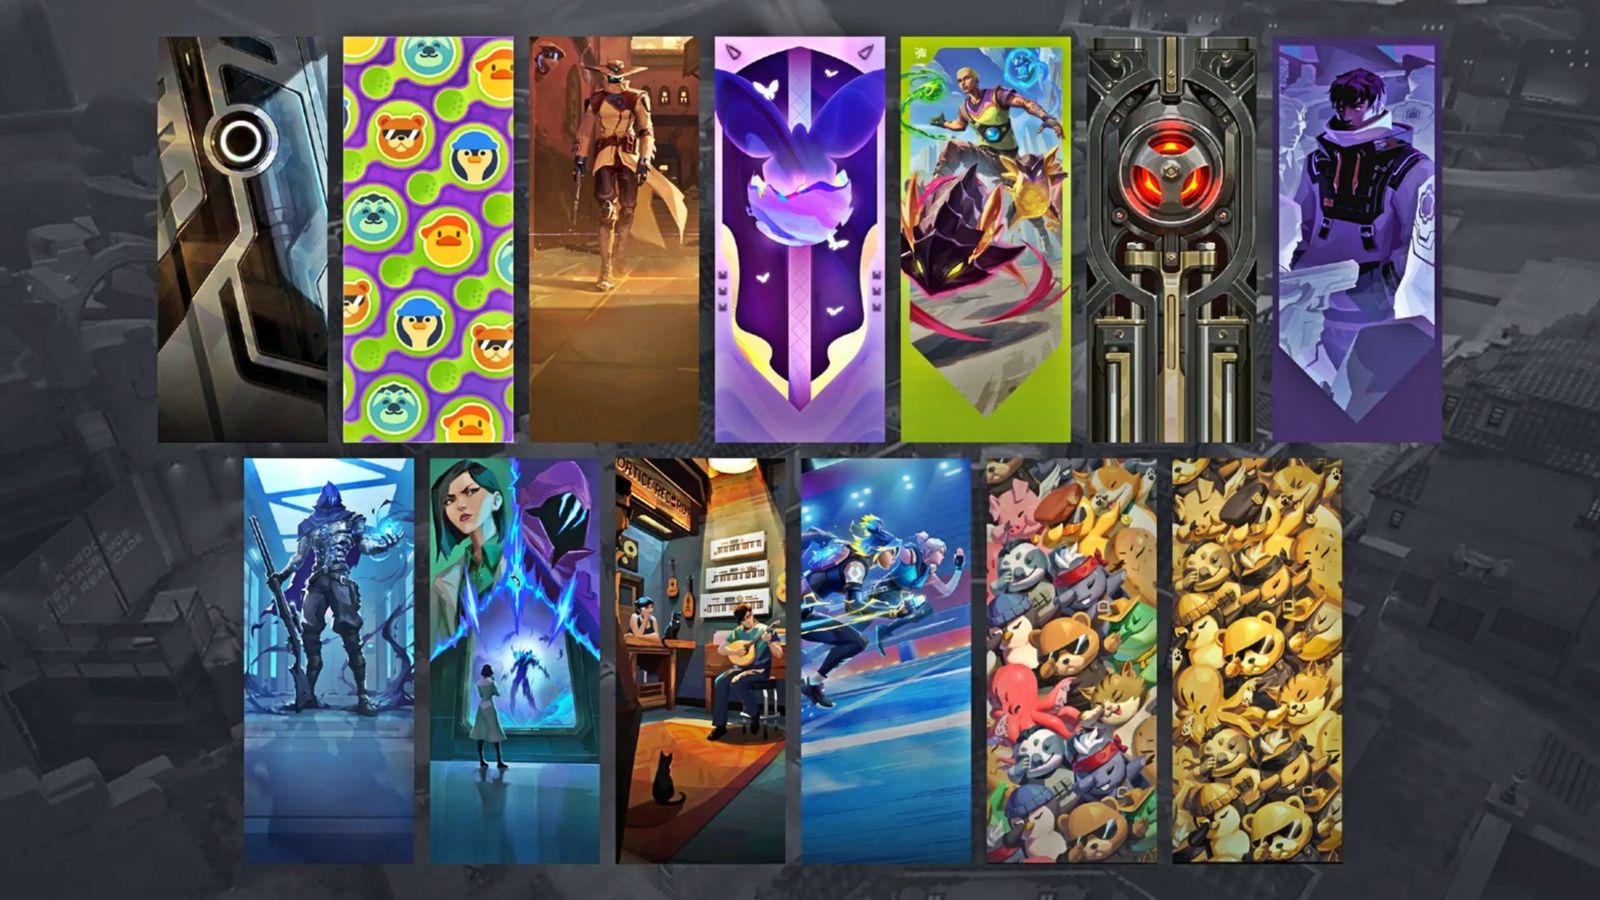 grid of 13 player cards from the Episode 8 Act 1 battle pass